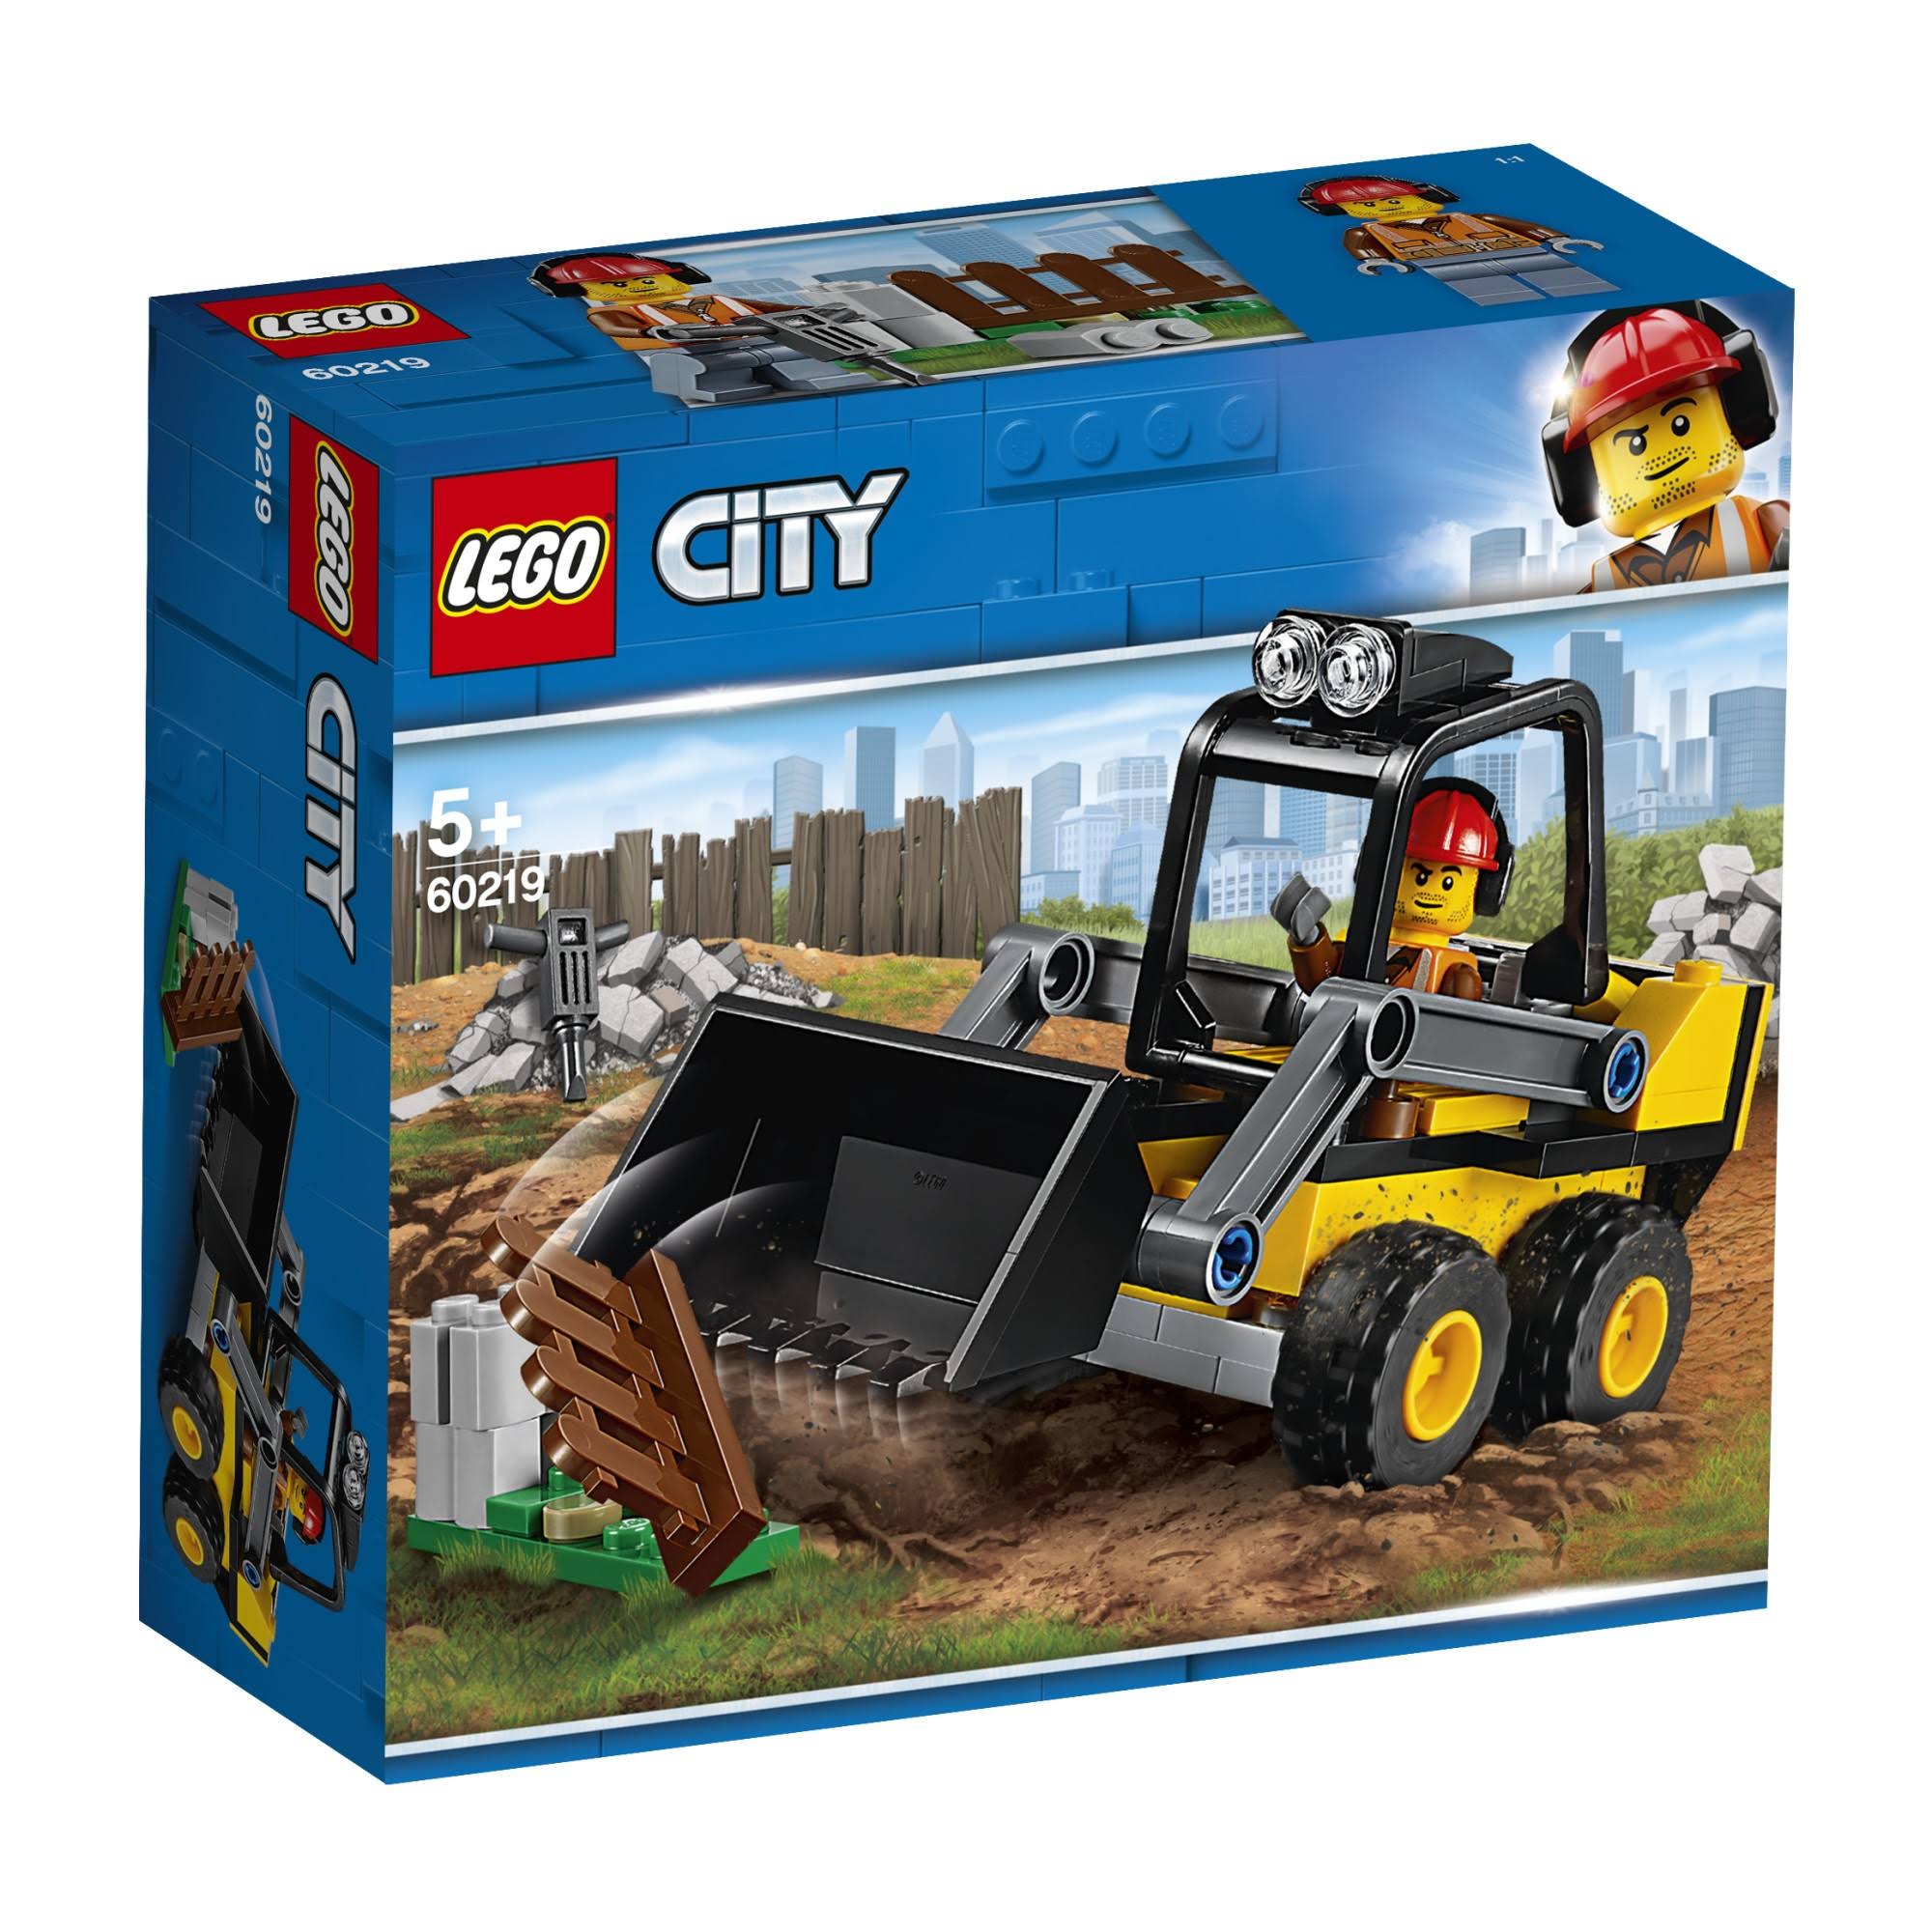 Lego City Frontlader 60219